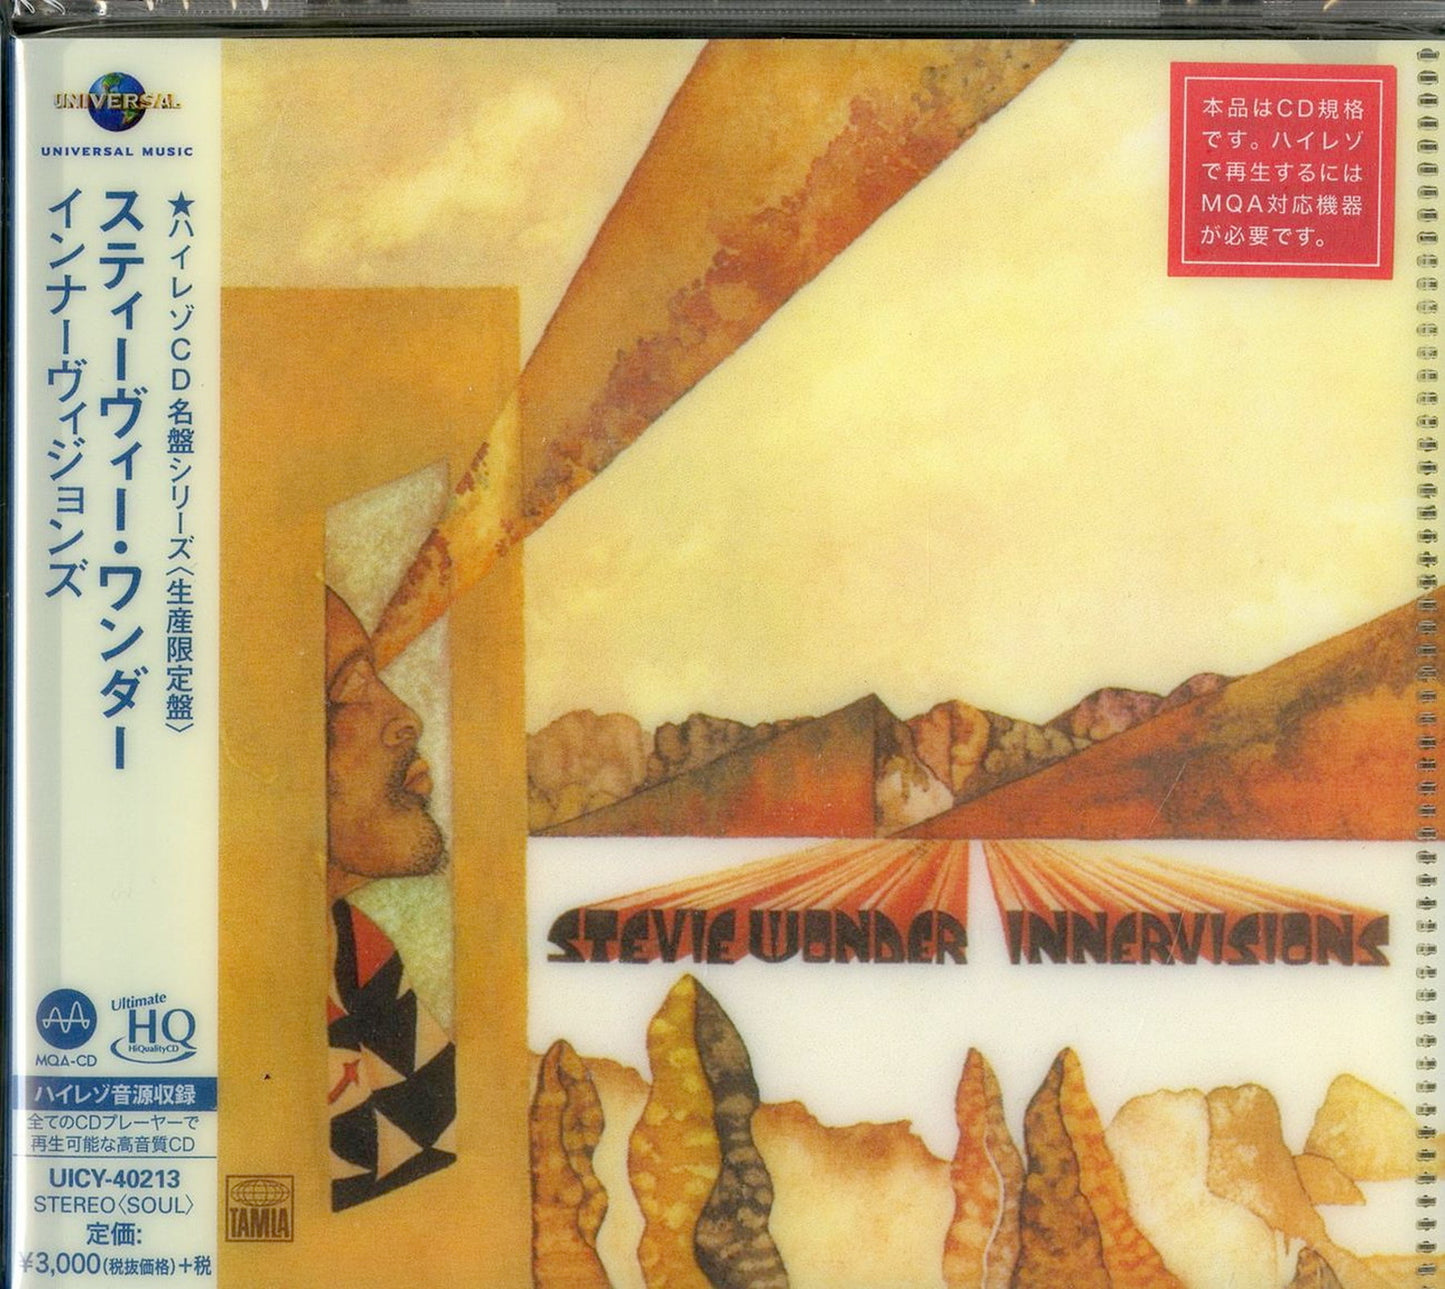 Stevie Wonder - Innervisions - Japan  UHQCD Limited Edition